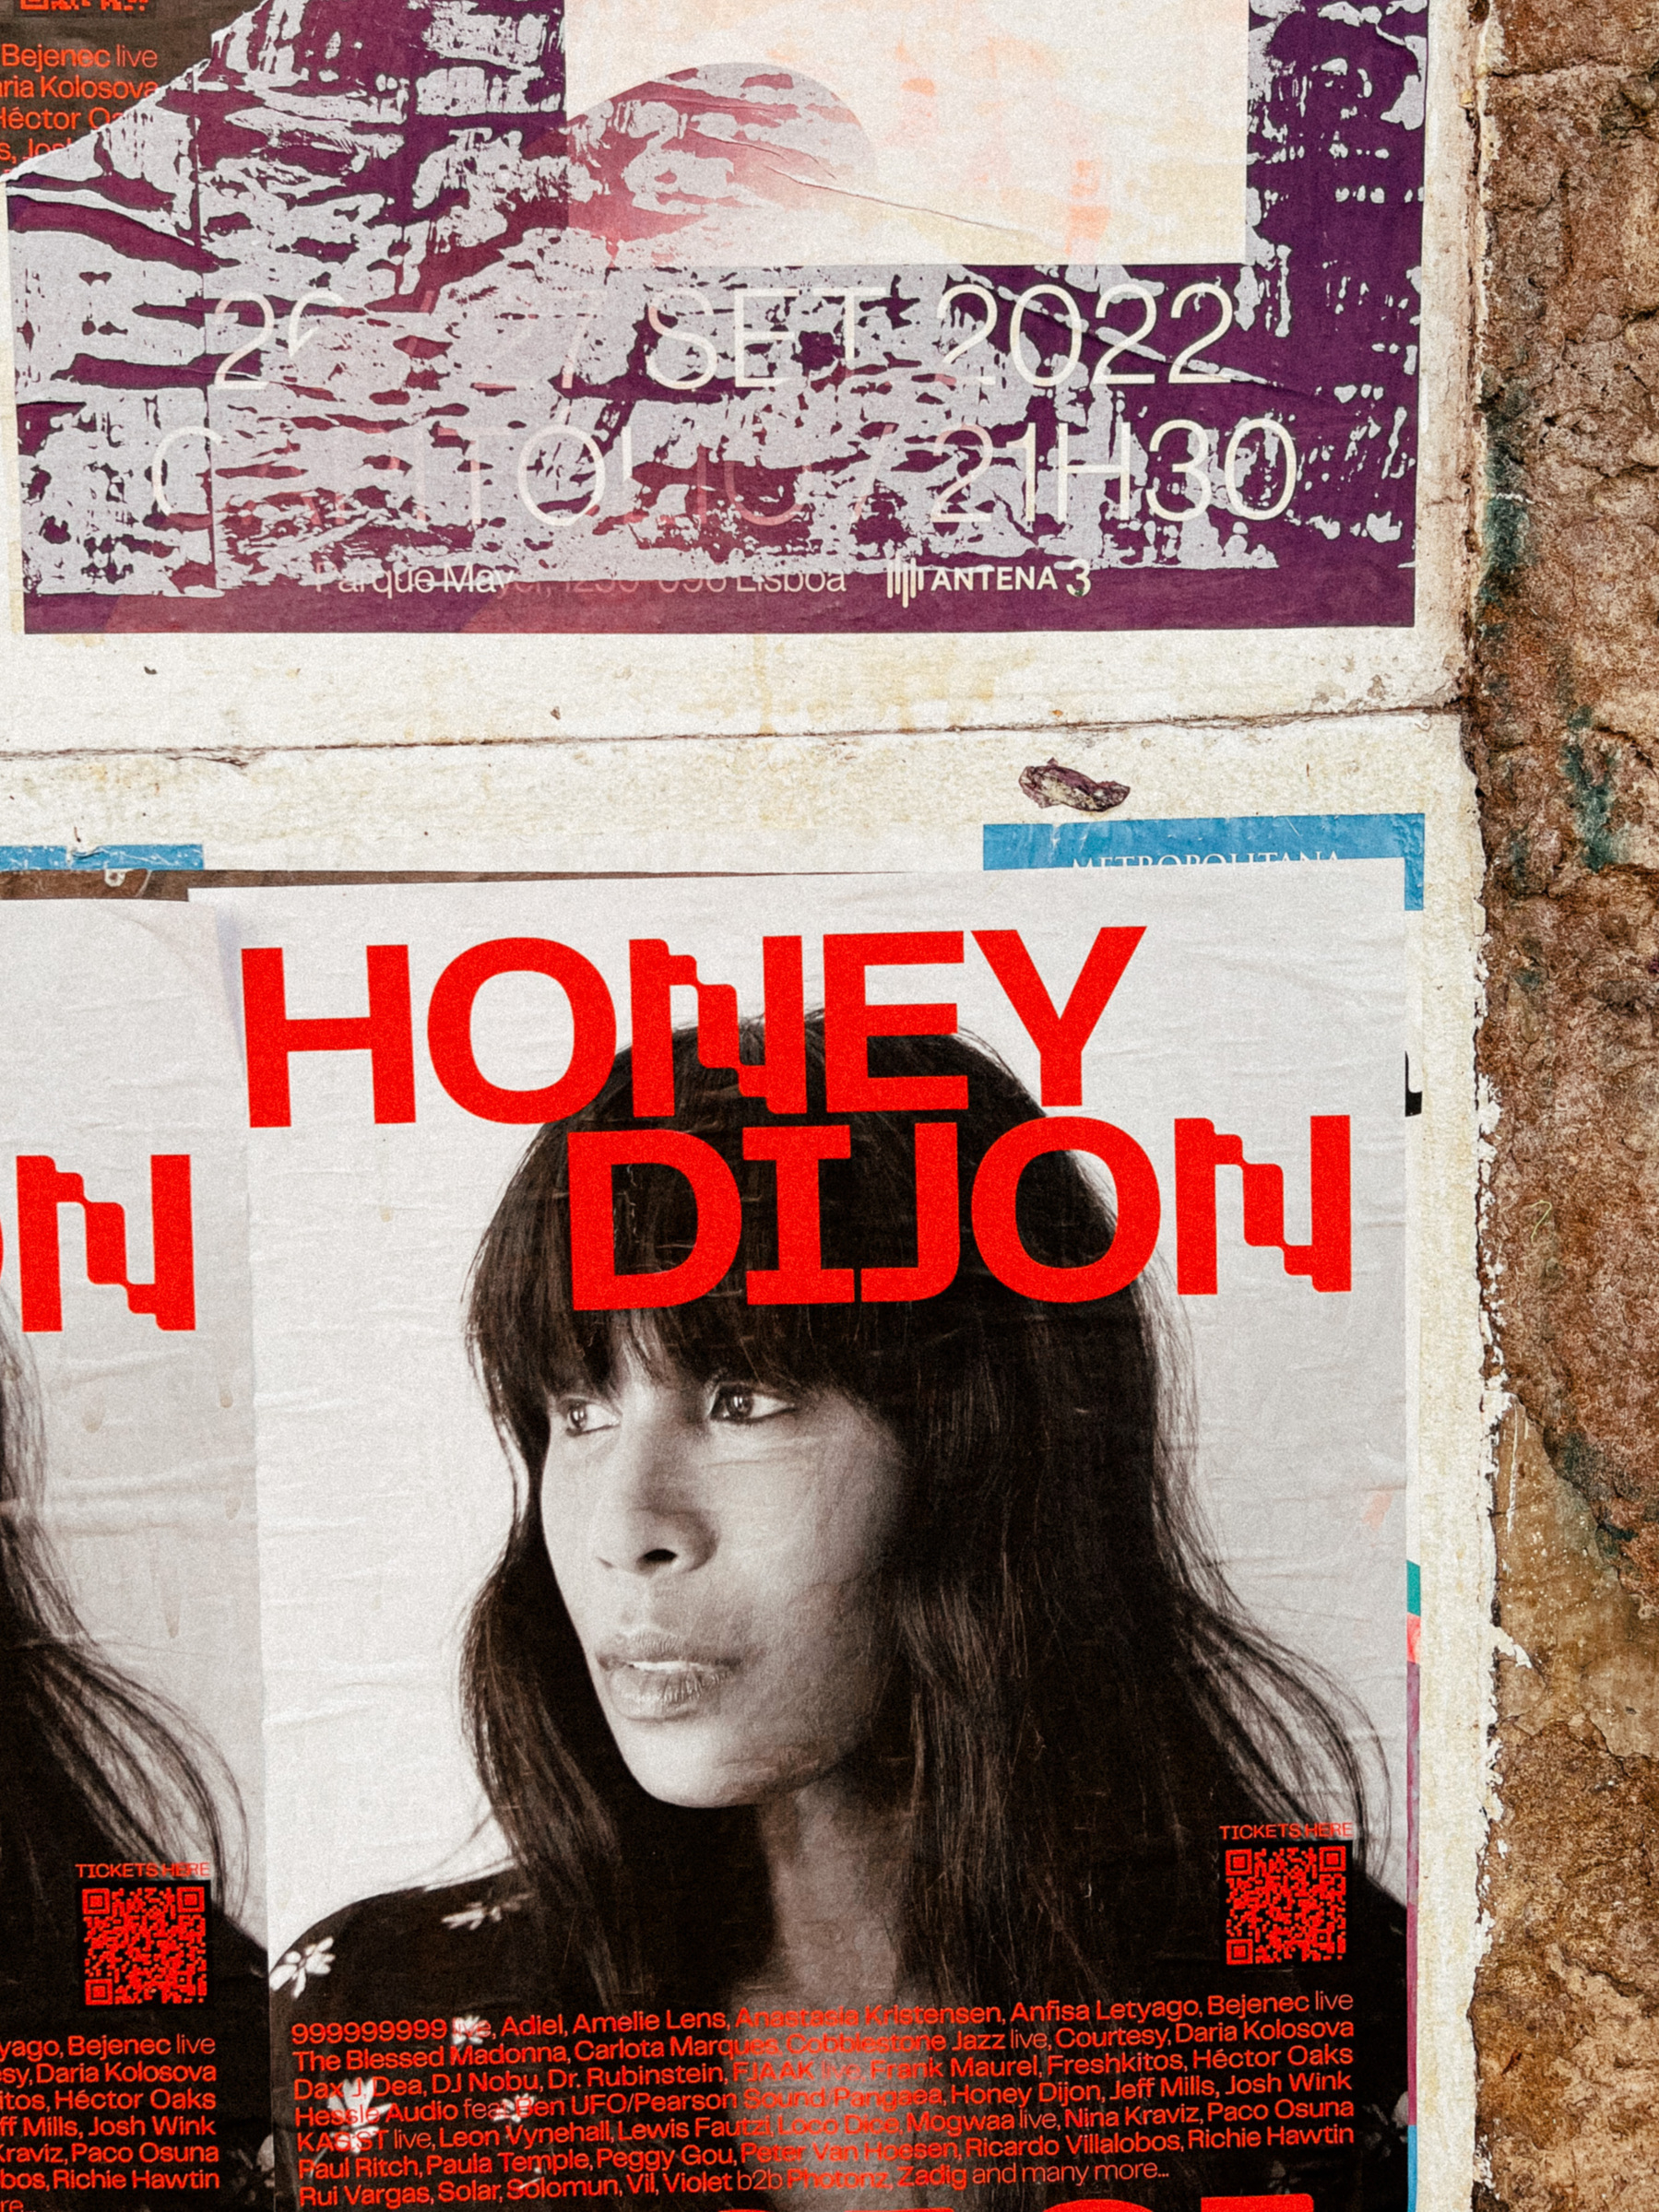 Poster for a DJ concert, the DJ is called Honey Dijon. 